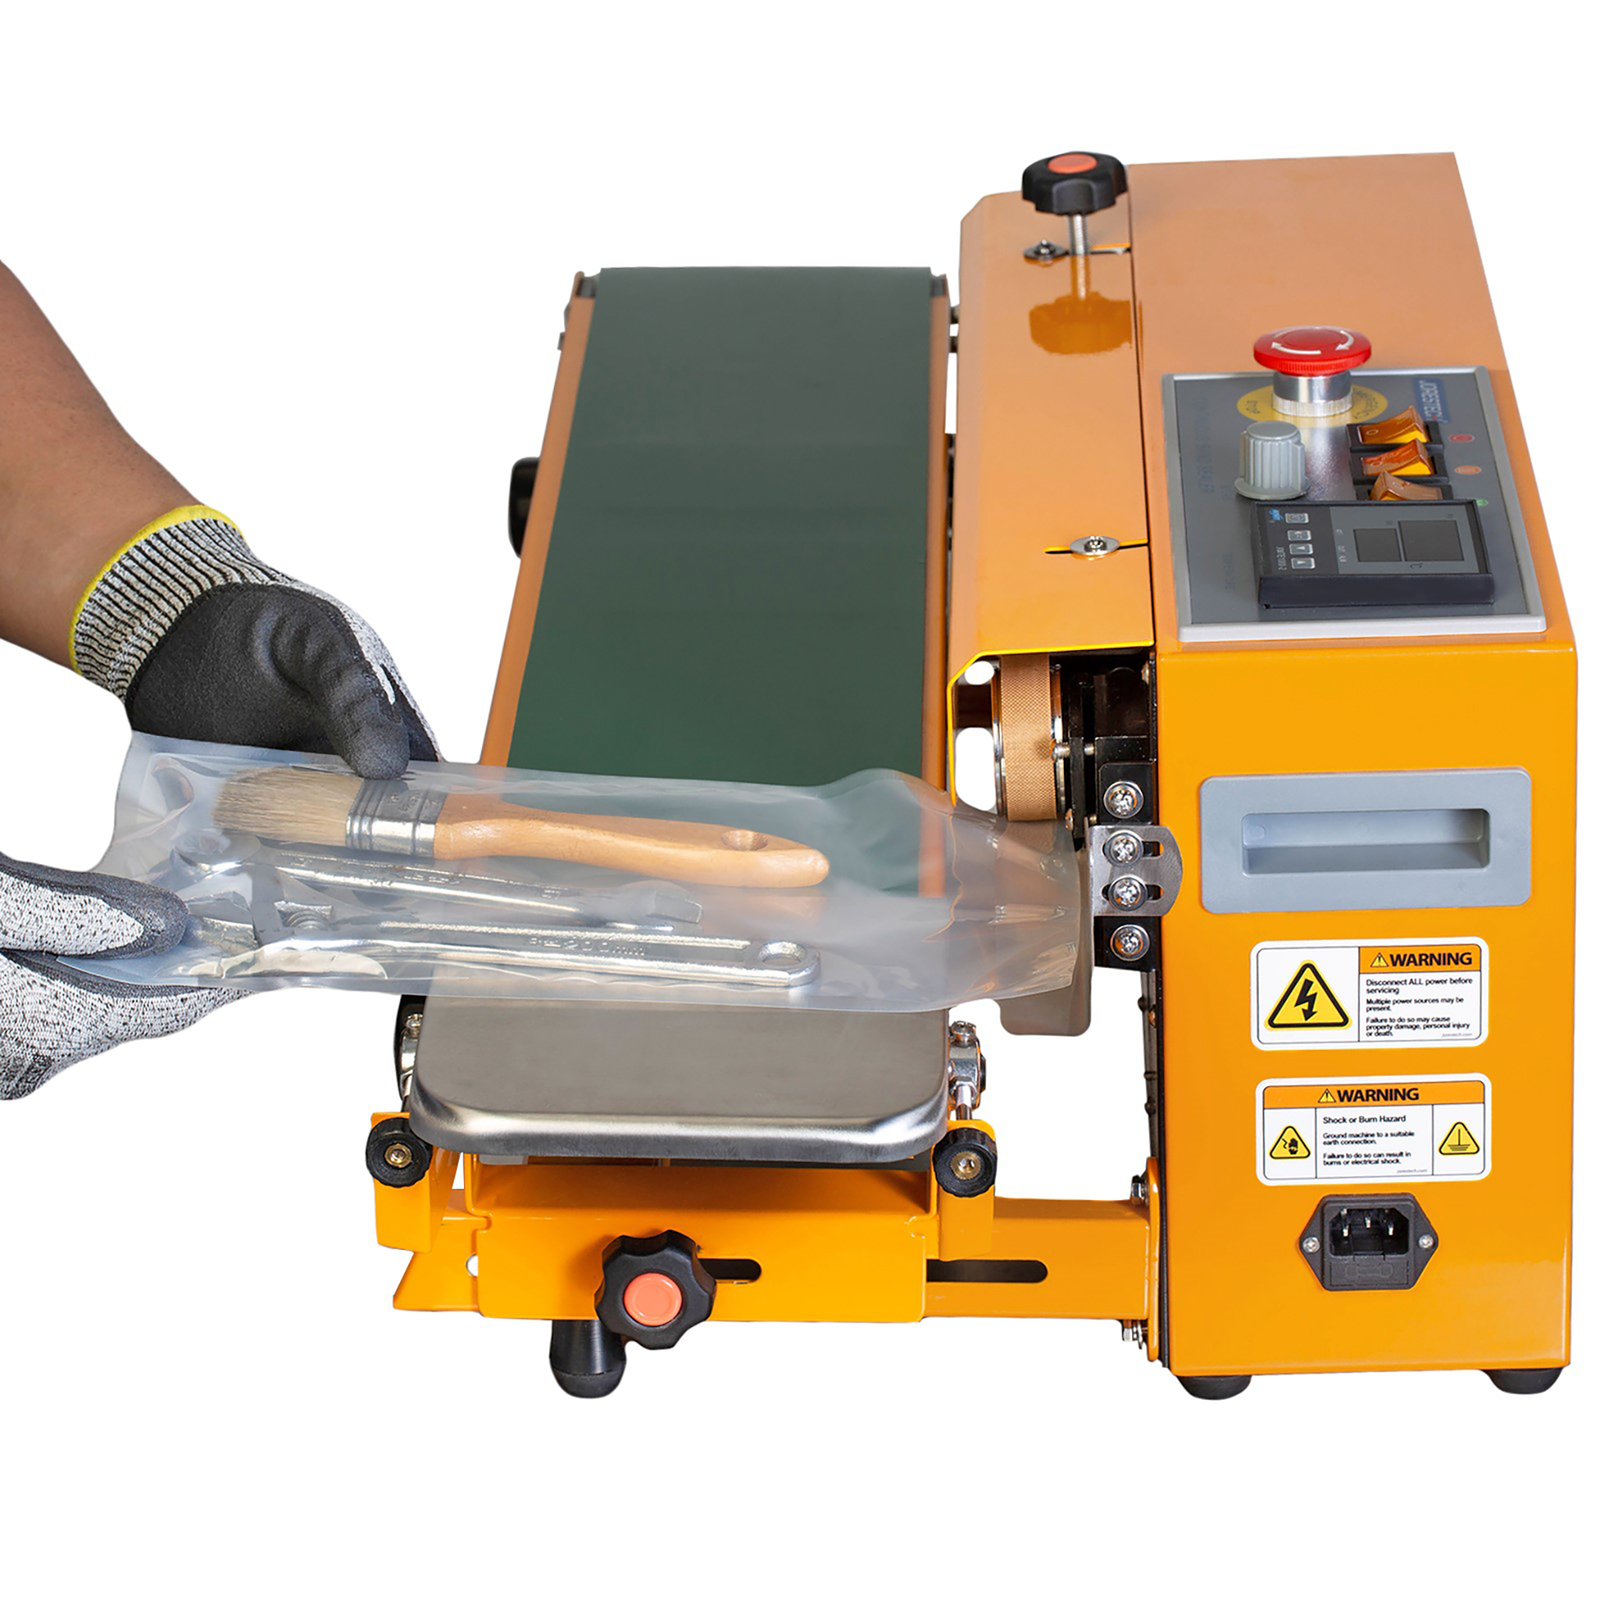 The hands of a person operating the JORES TECHNOLOGIES® Horizontal Continuous Band Sealer. The worker is sealing a sealable bag with several tools inside.